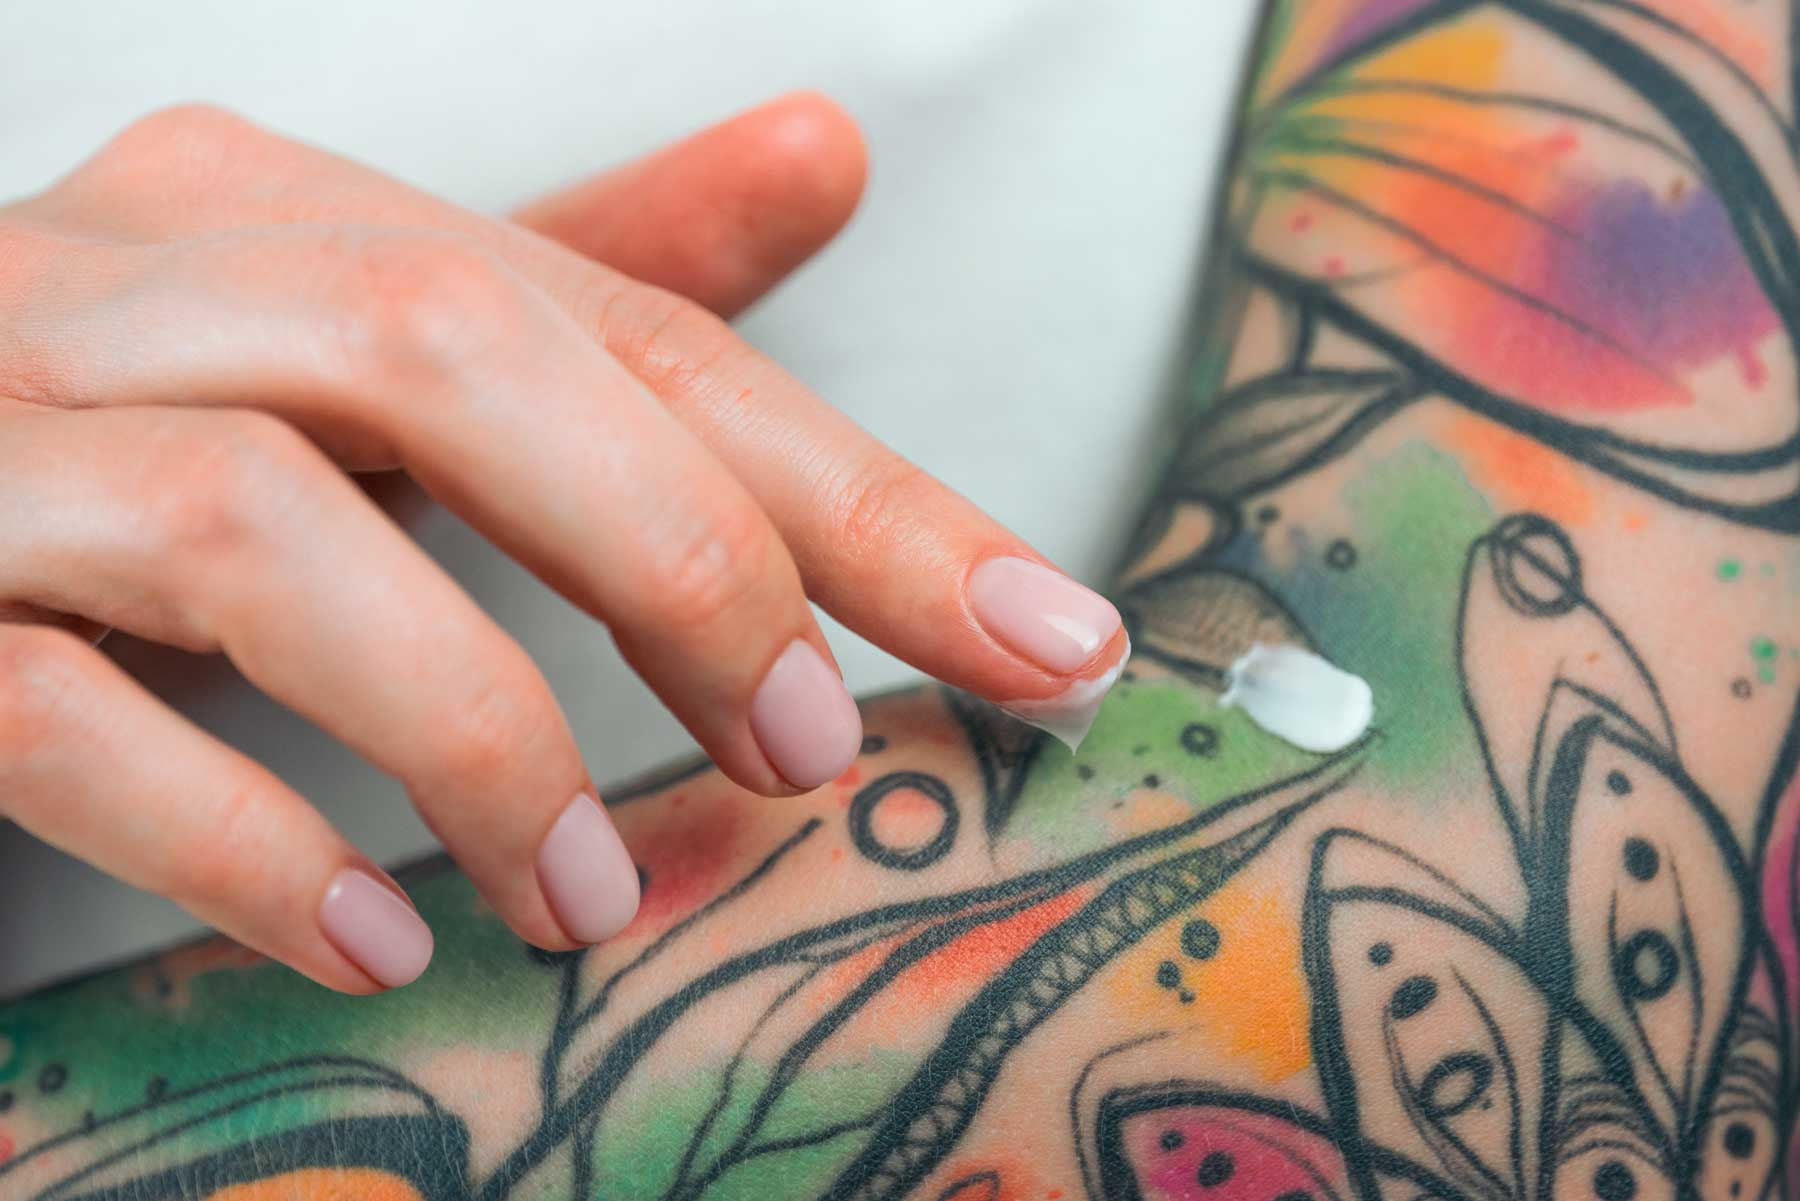 Would you get matching property of tattoos with your spouse  Quora